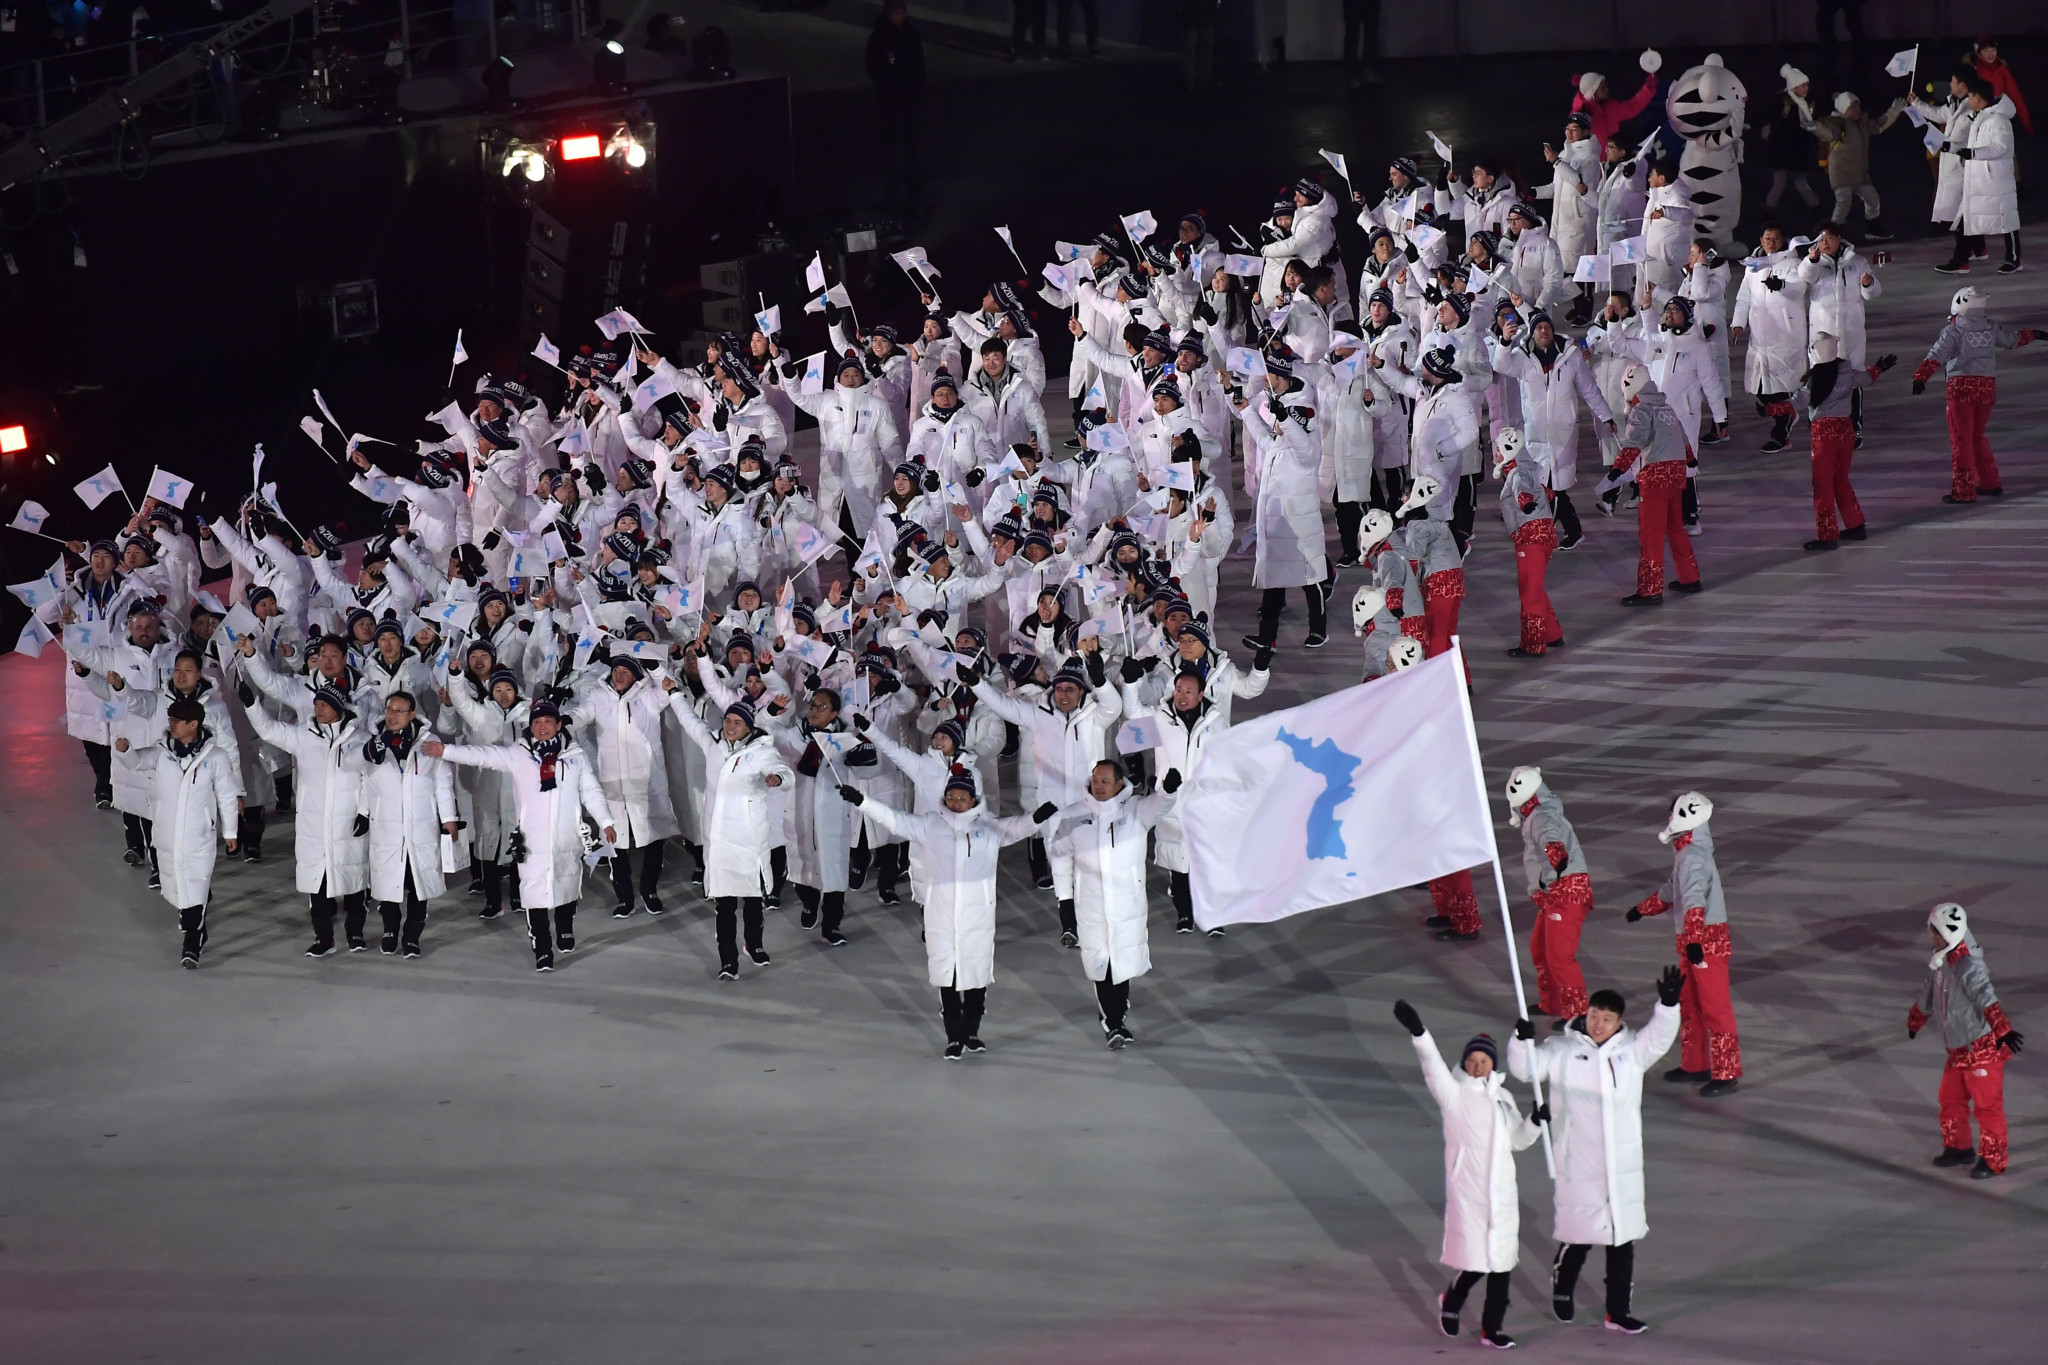 Athletes from both Koreas marched under a unified flag at the Opening Ceremony of the Winter Olympic Games ©Getty Images